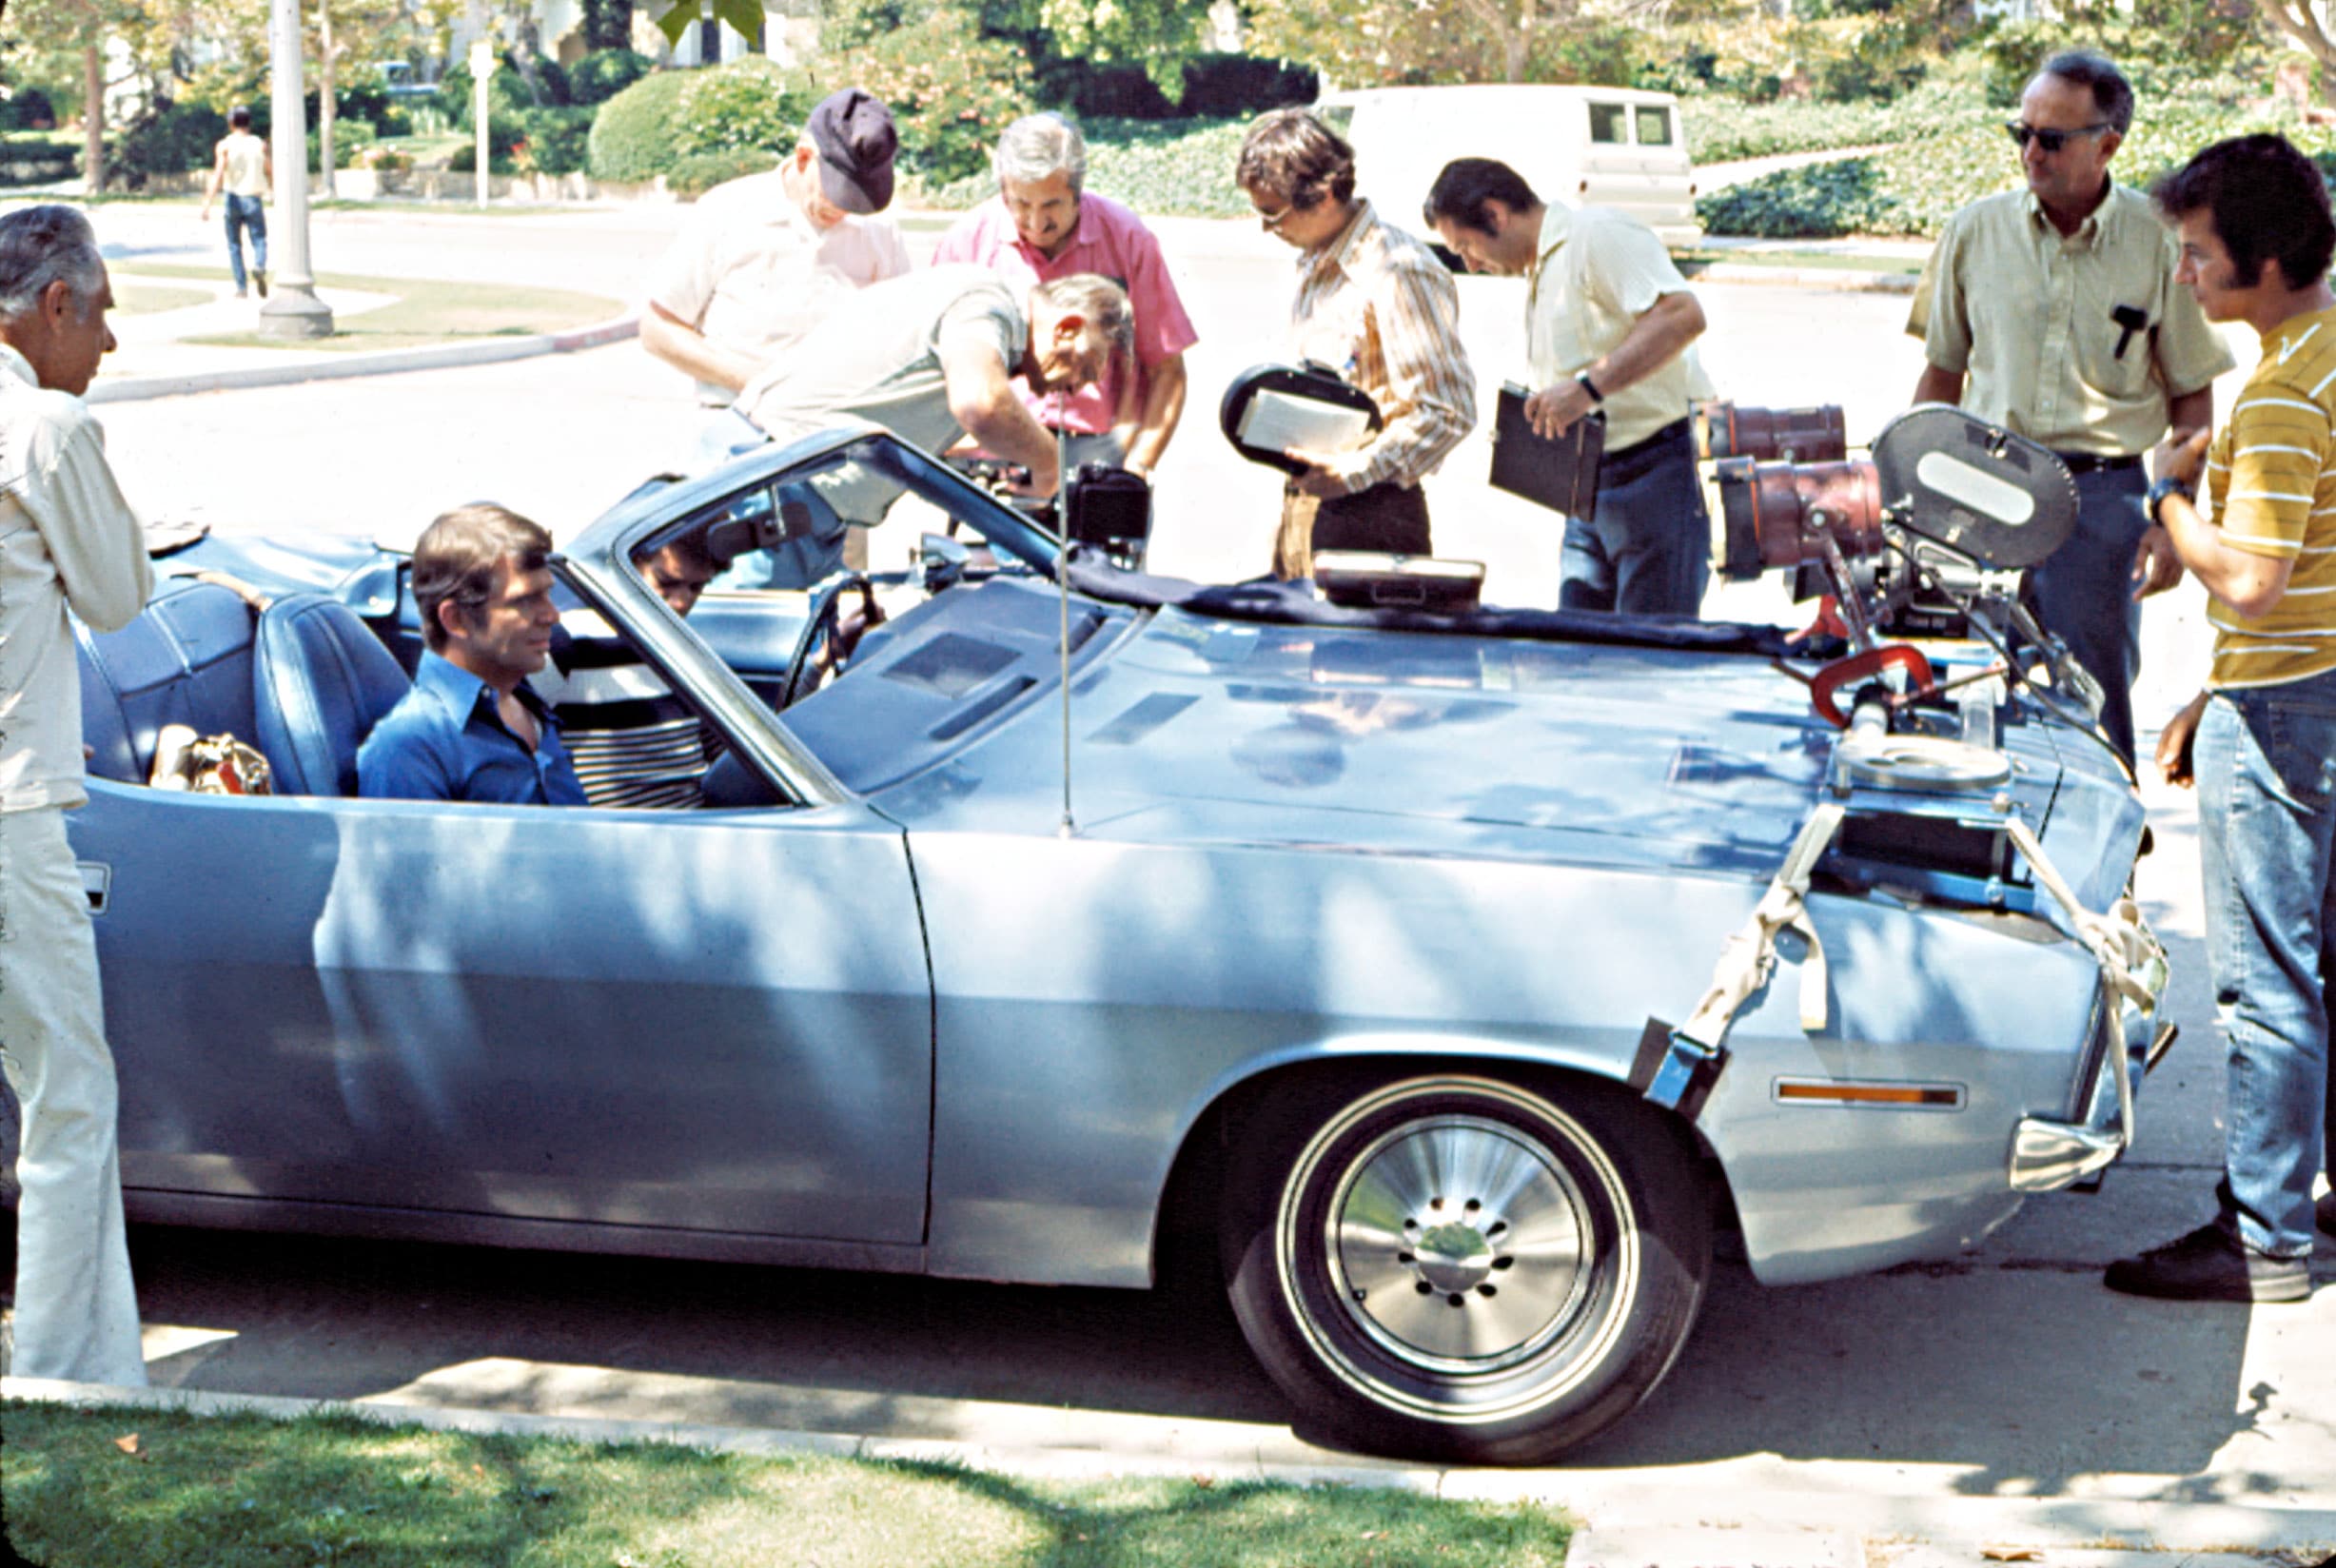 THE BRADY BUNCH, Robert Reed and the production crew, filming a scene in his car, 1969-1974